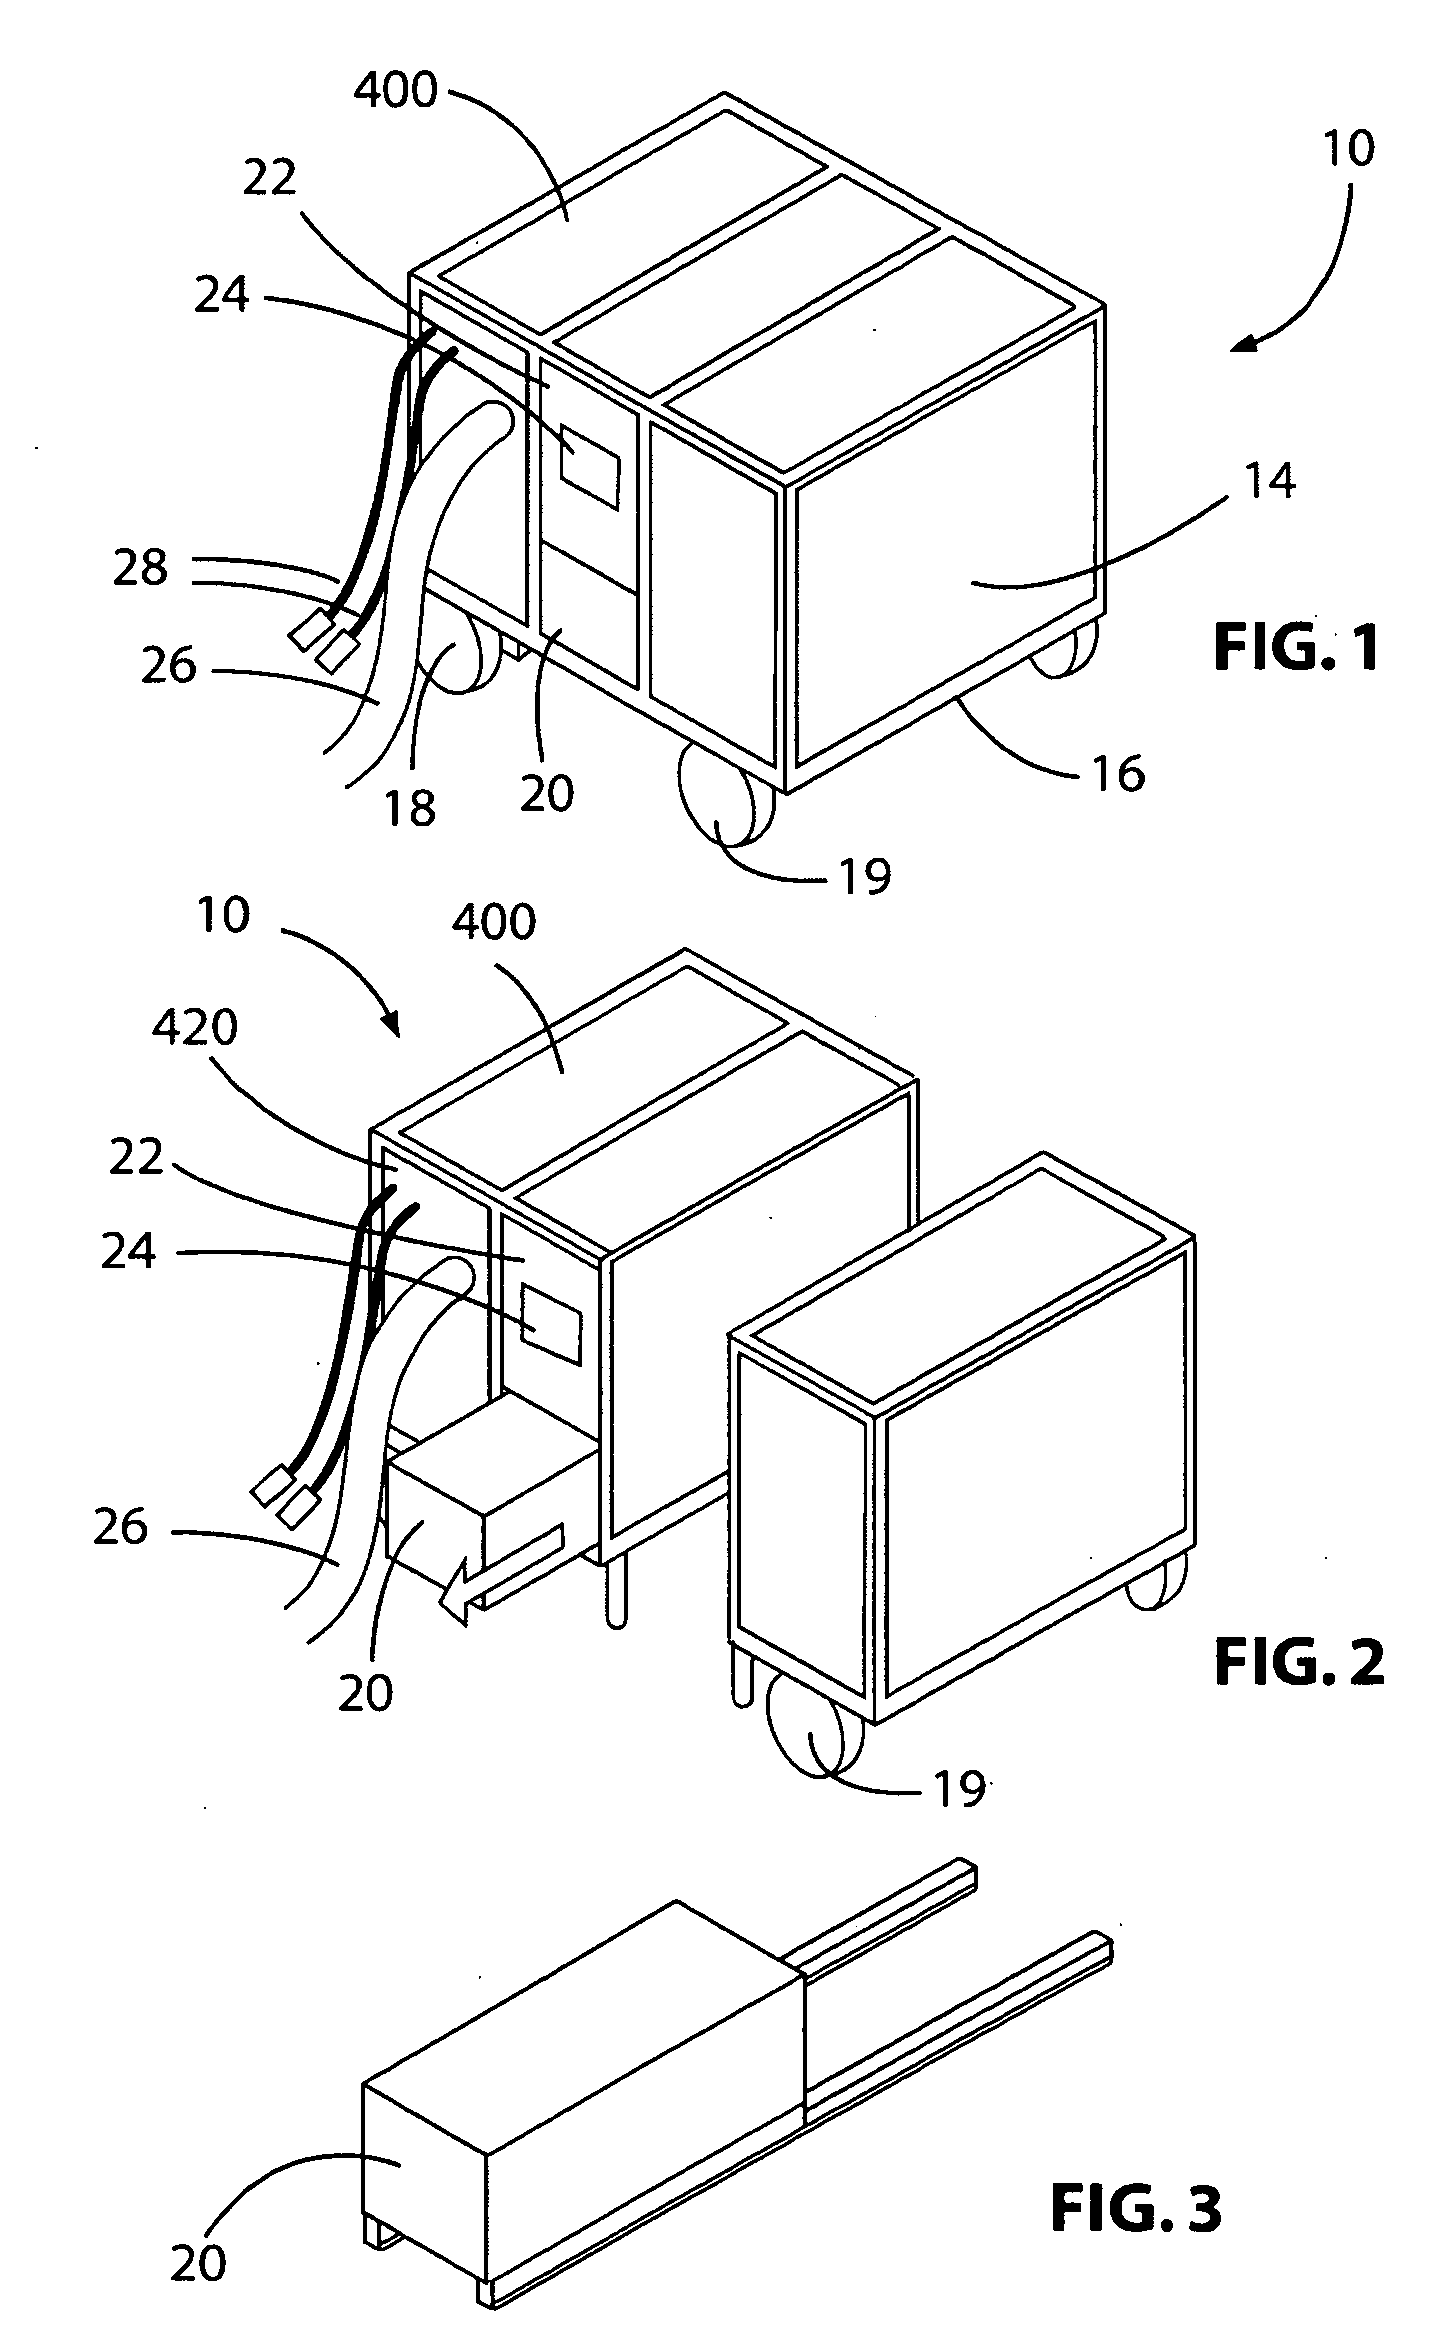 Adjustable air conditioning control system for a universal airplane ground support equipment cart